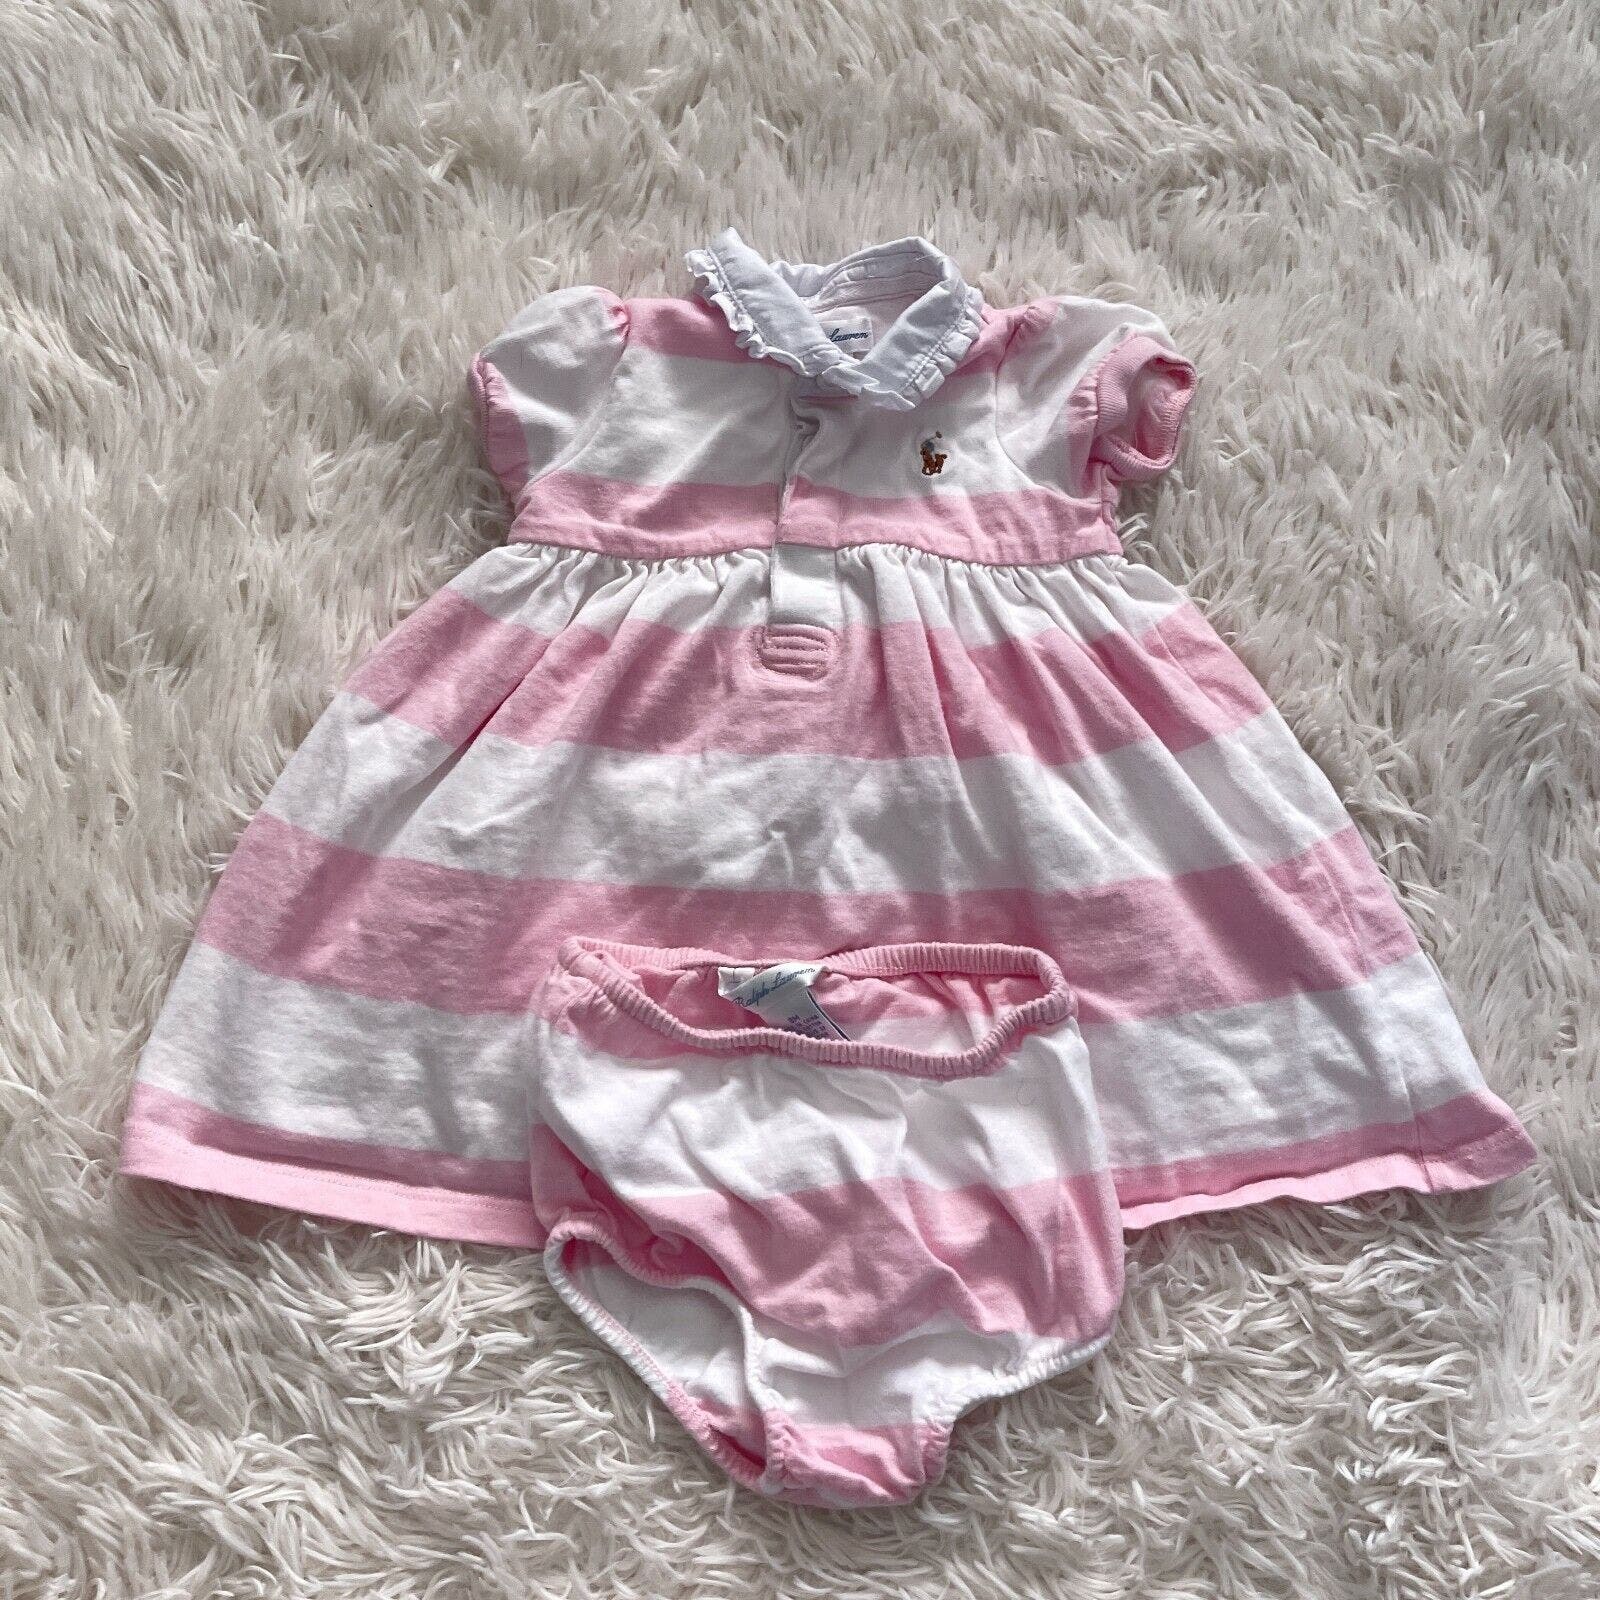 Ralph Lauren Striped Rugby Polo Dress & Shorts Set Pink White Baby Girl 9 Month - $34.64